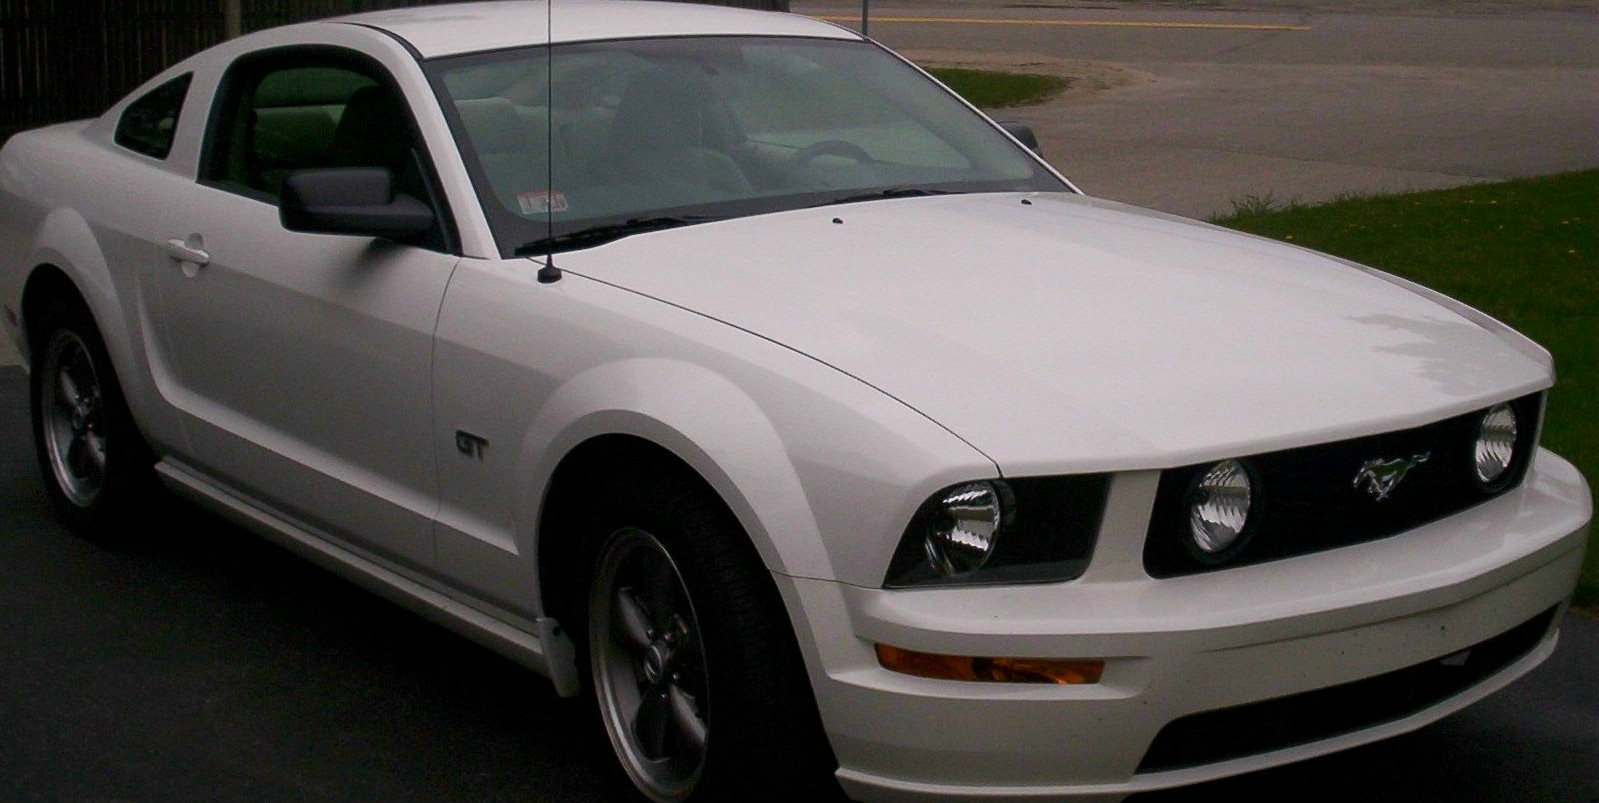  2005 Ford Mustang GT Vortech S-Trim Supercharger